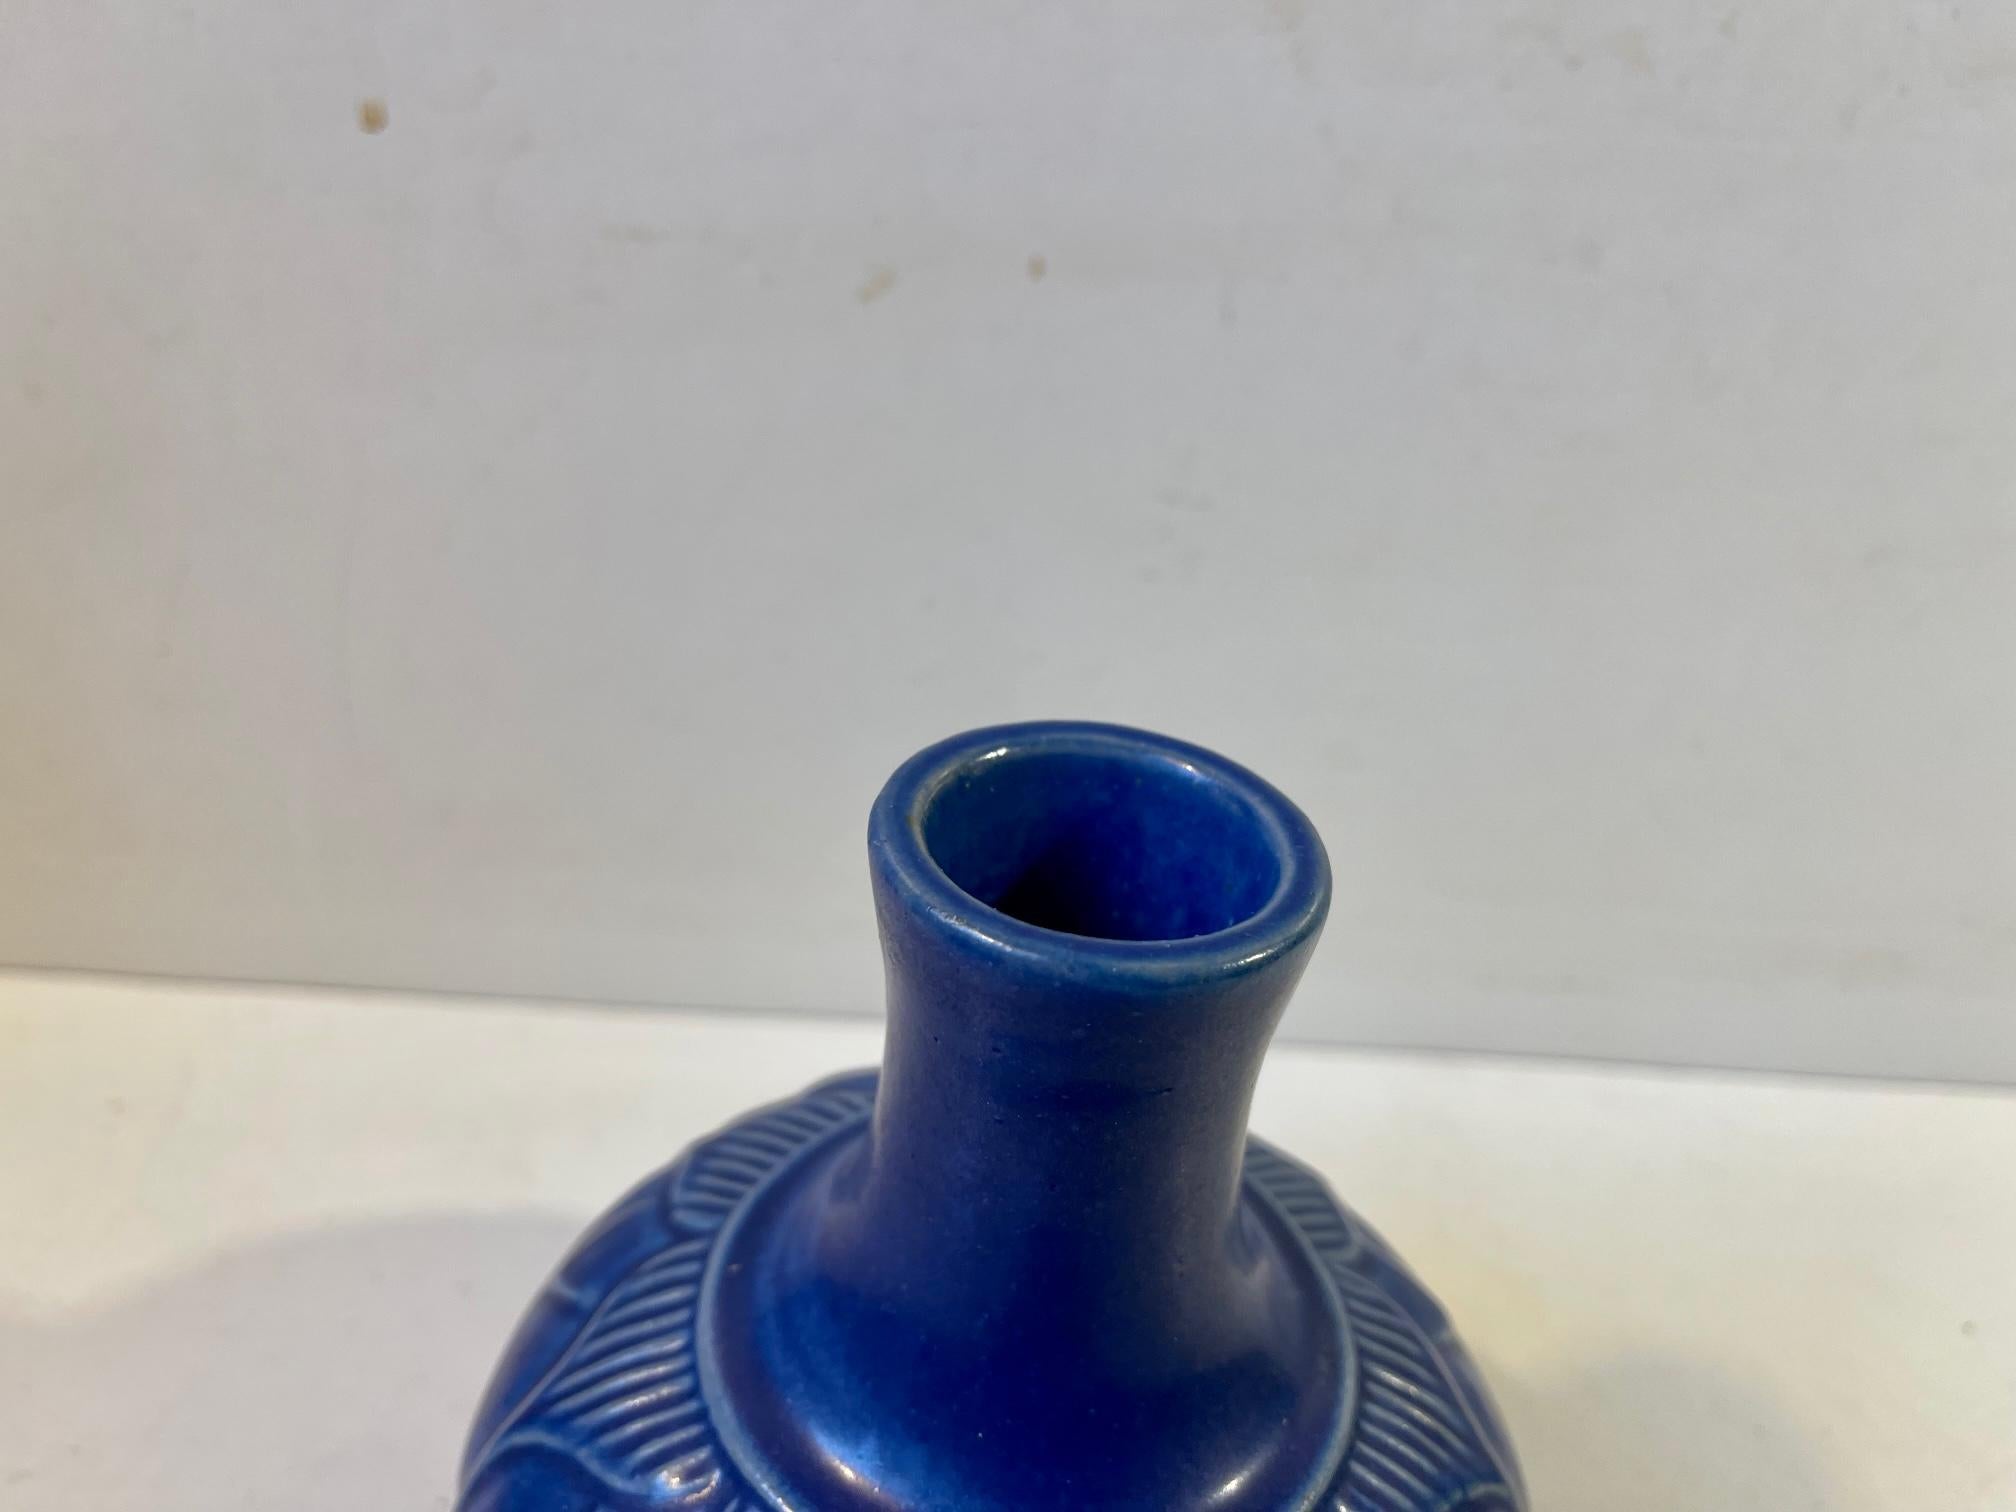 Glazed Scandinavian Stoneware Vase with Blue Glaze from Lauritz Hjorth, 1950s For Sale